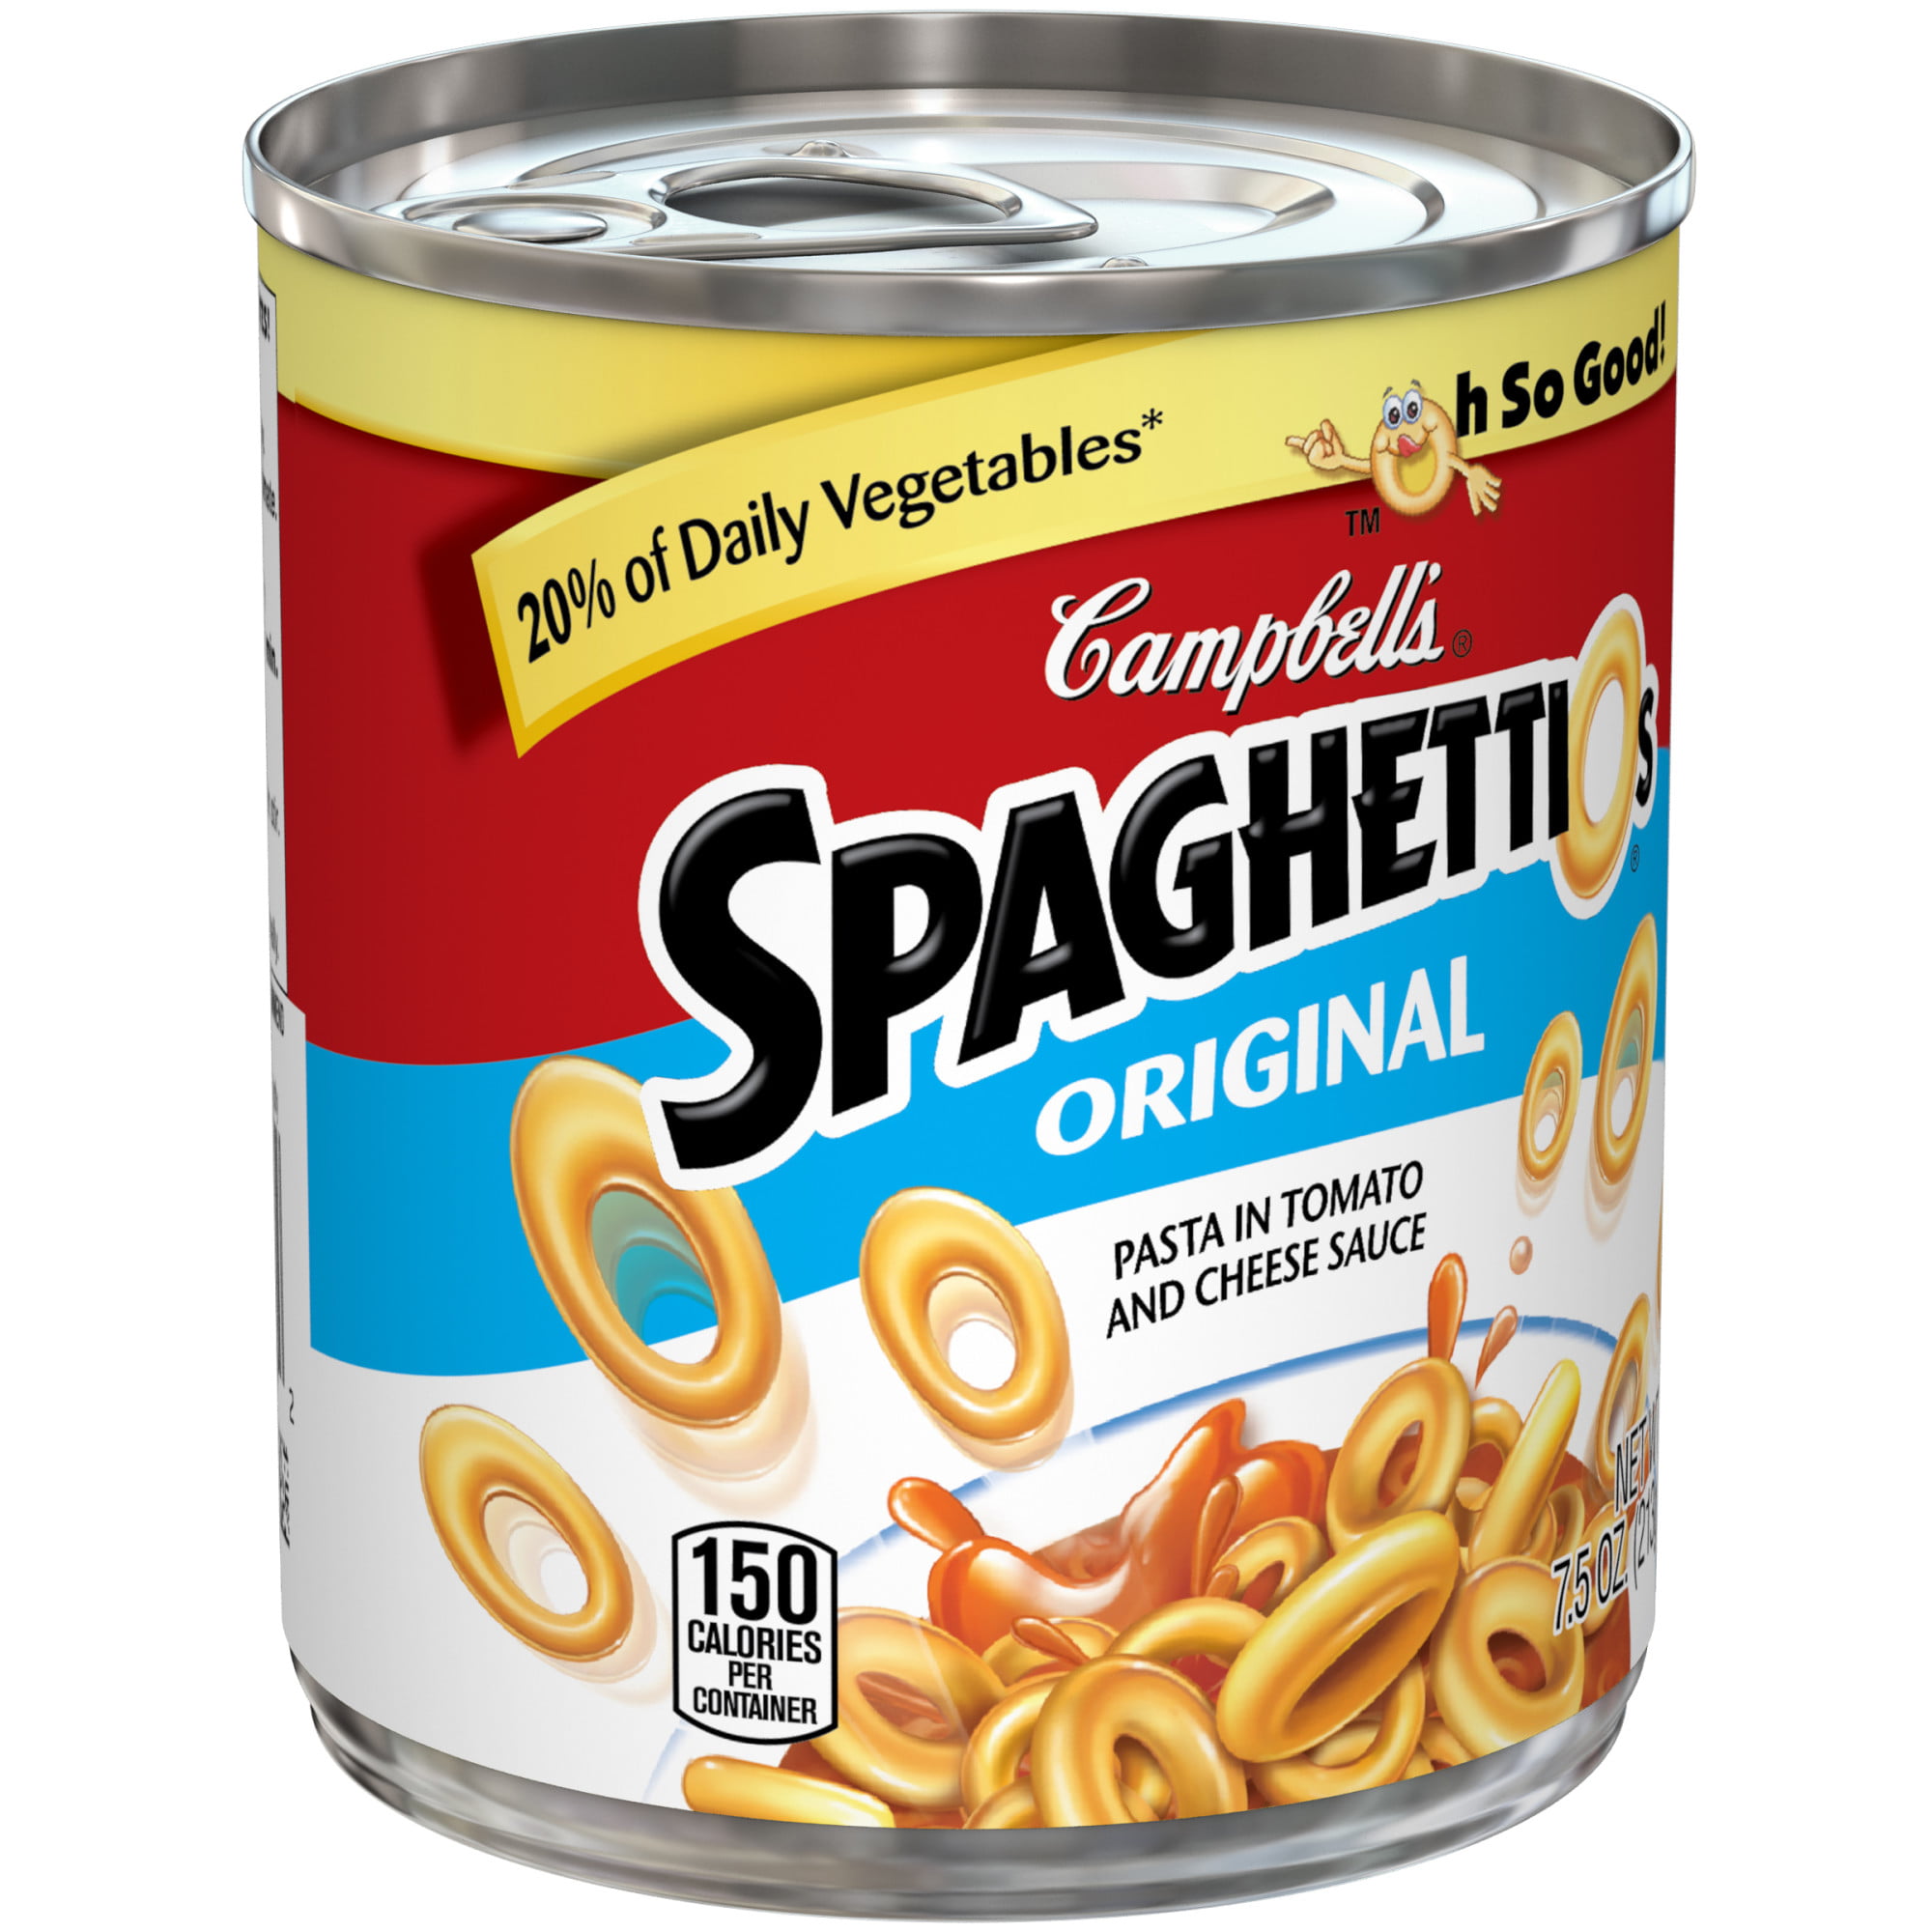 Campbell's SpaghettiOs Beefy TacOs Pasta 14.75 oz., Canned Pasta